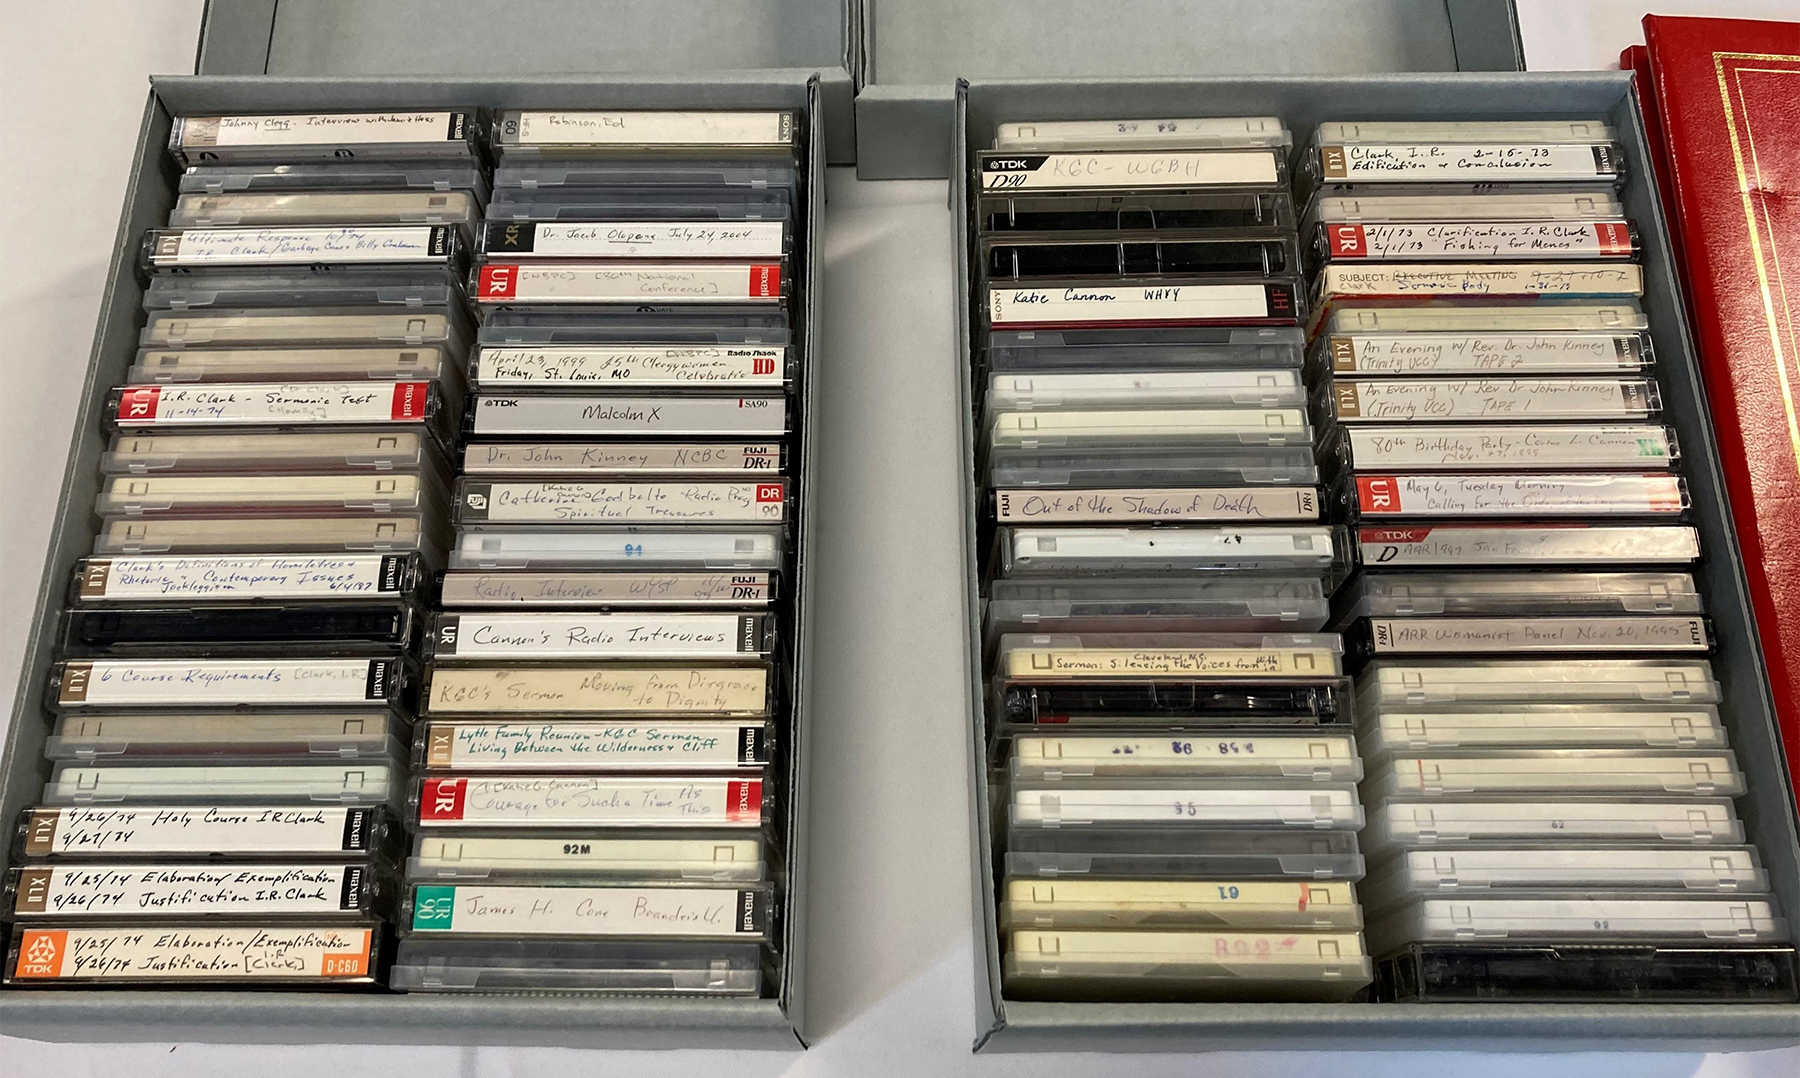 Some Katie Geneva Cannon cassette tapes on display in PHS lobby. Photo by Fred Tangeman.